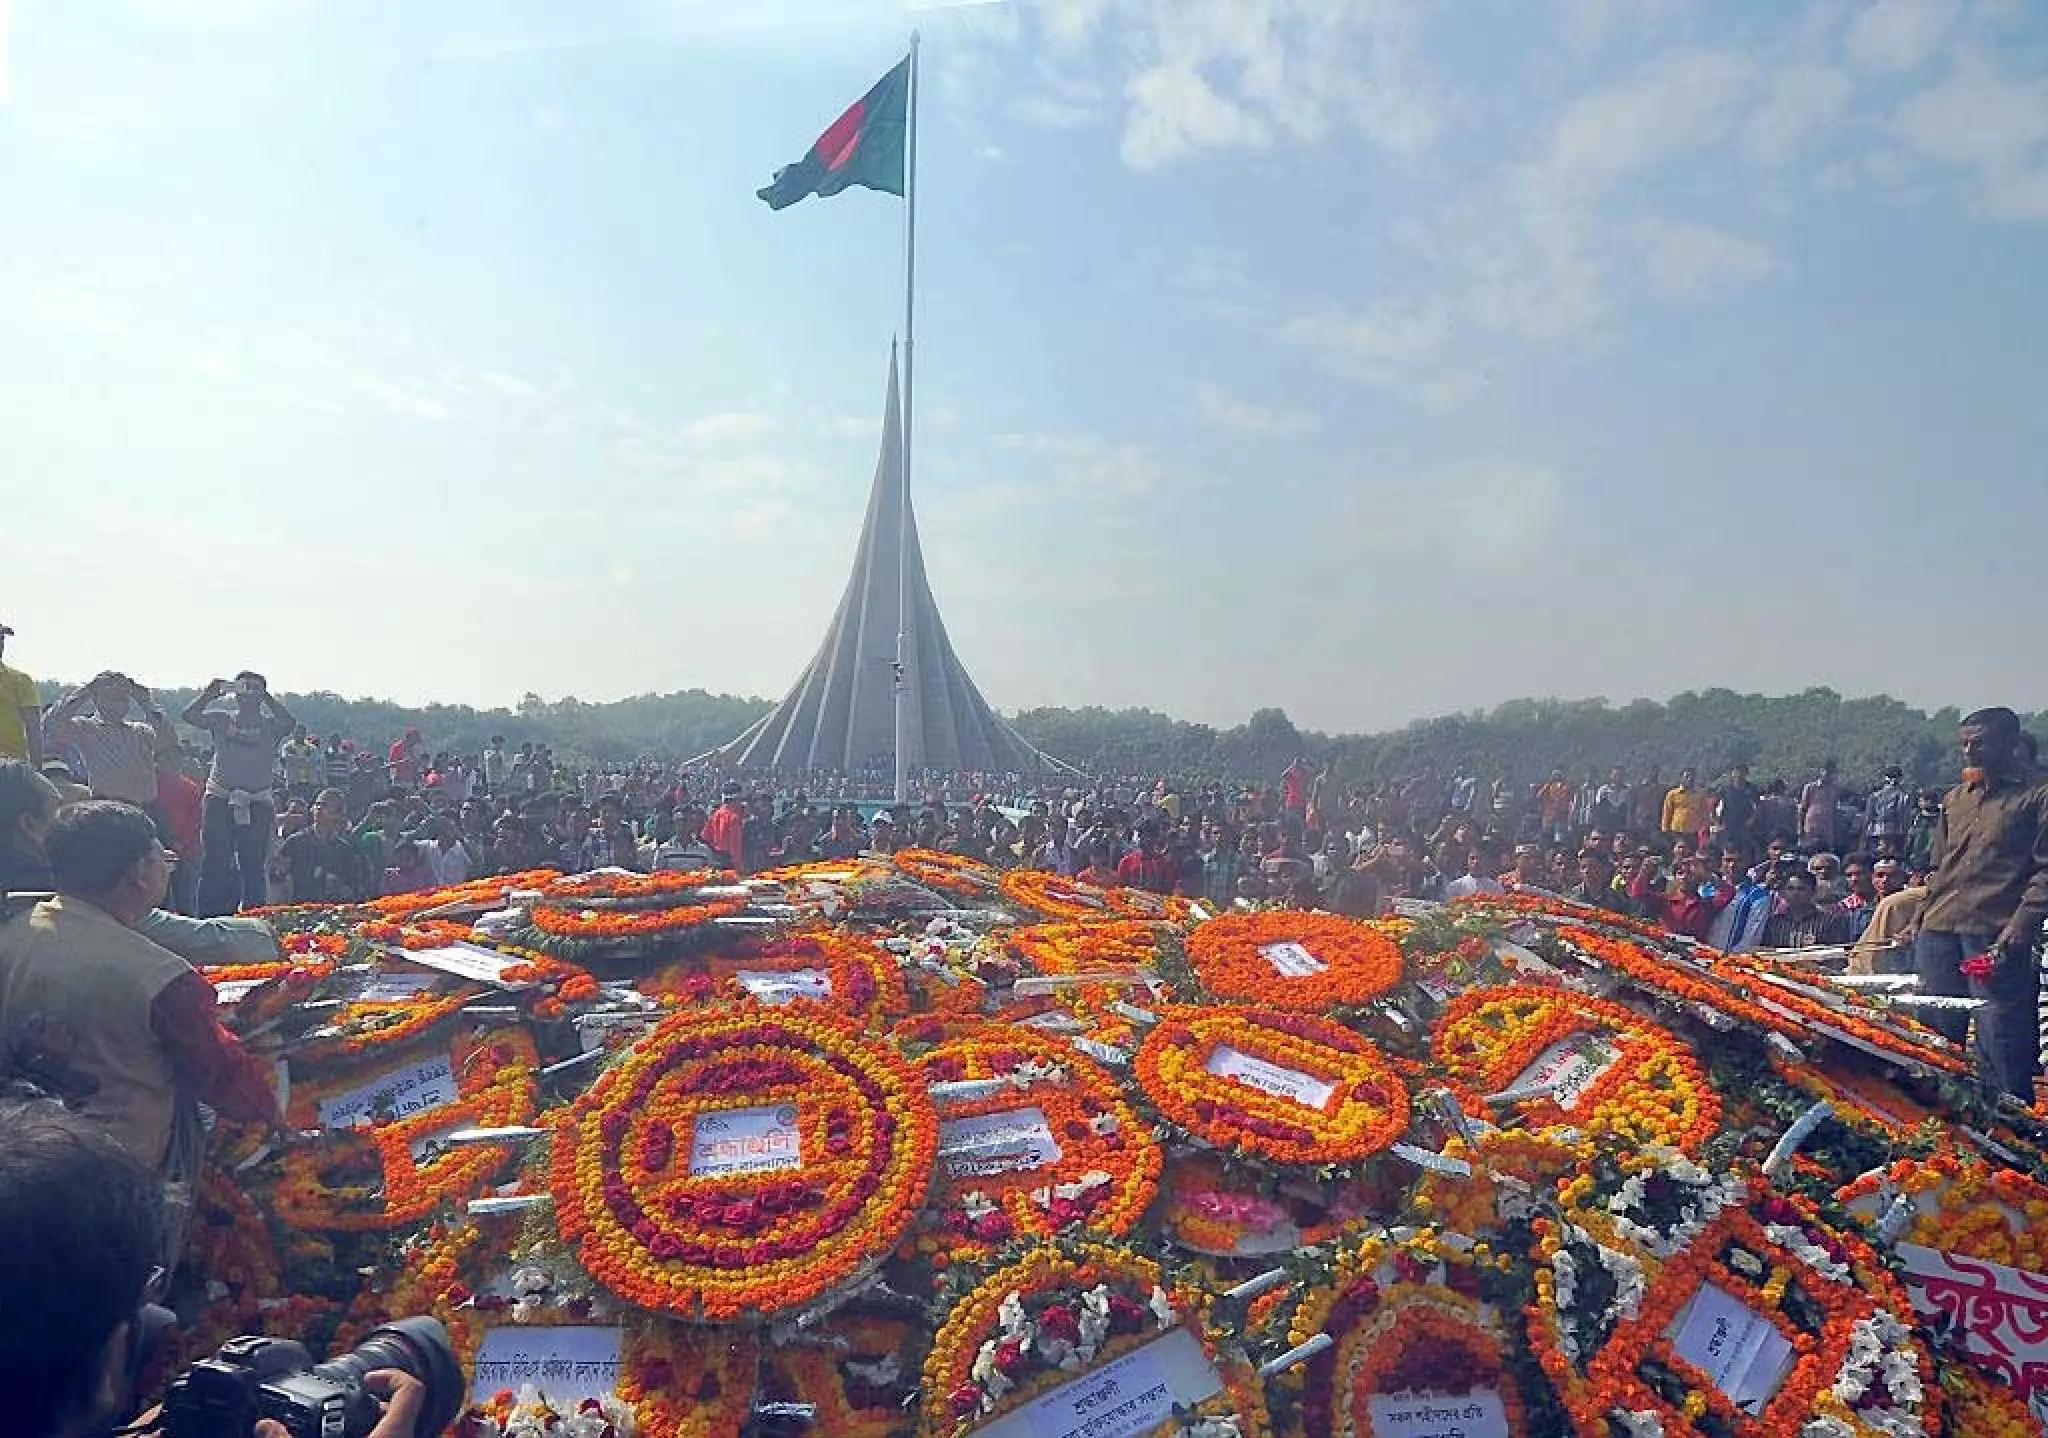 images and quotes on victory day of bangladesh